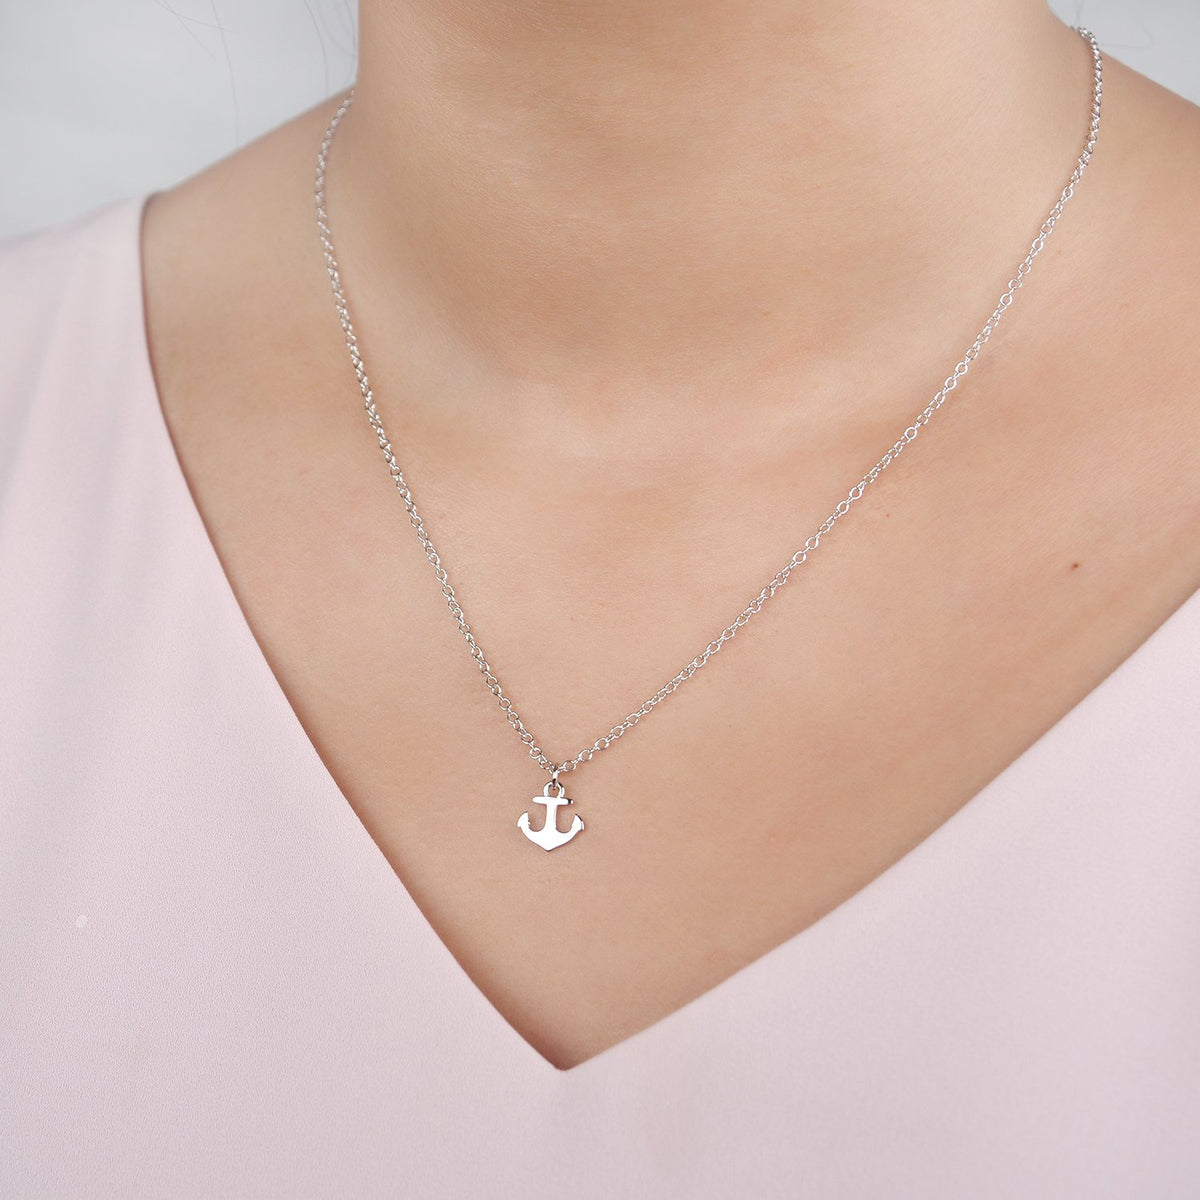 Anchor Necklace - Dear Ava, Jewelry / Necklaces / Pendants